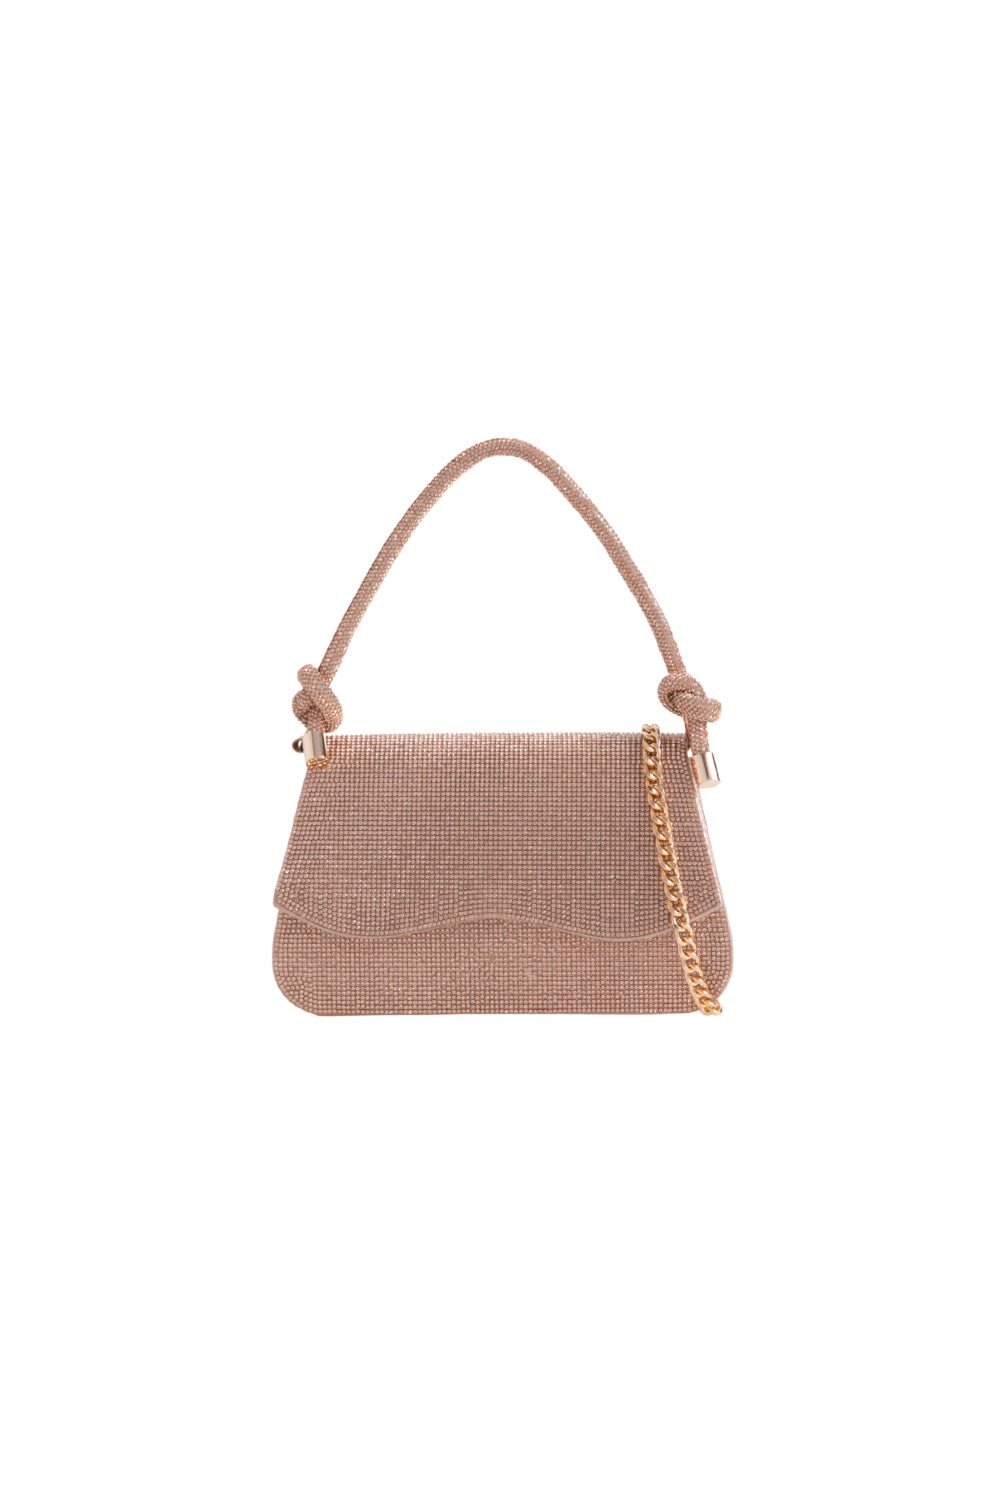 Rose Gold Diamante Top Handle Bag With Knot Details